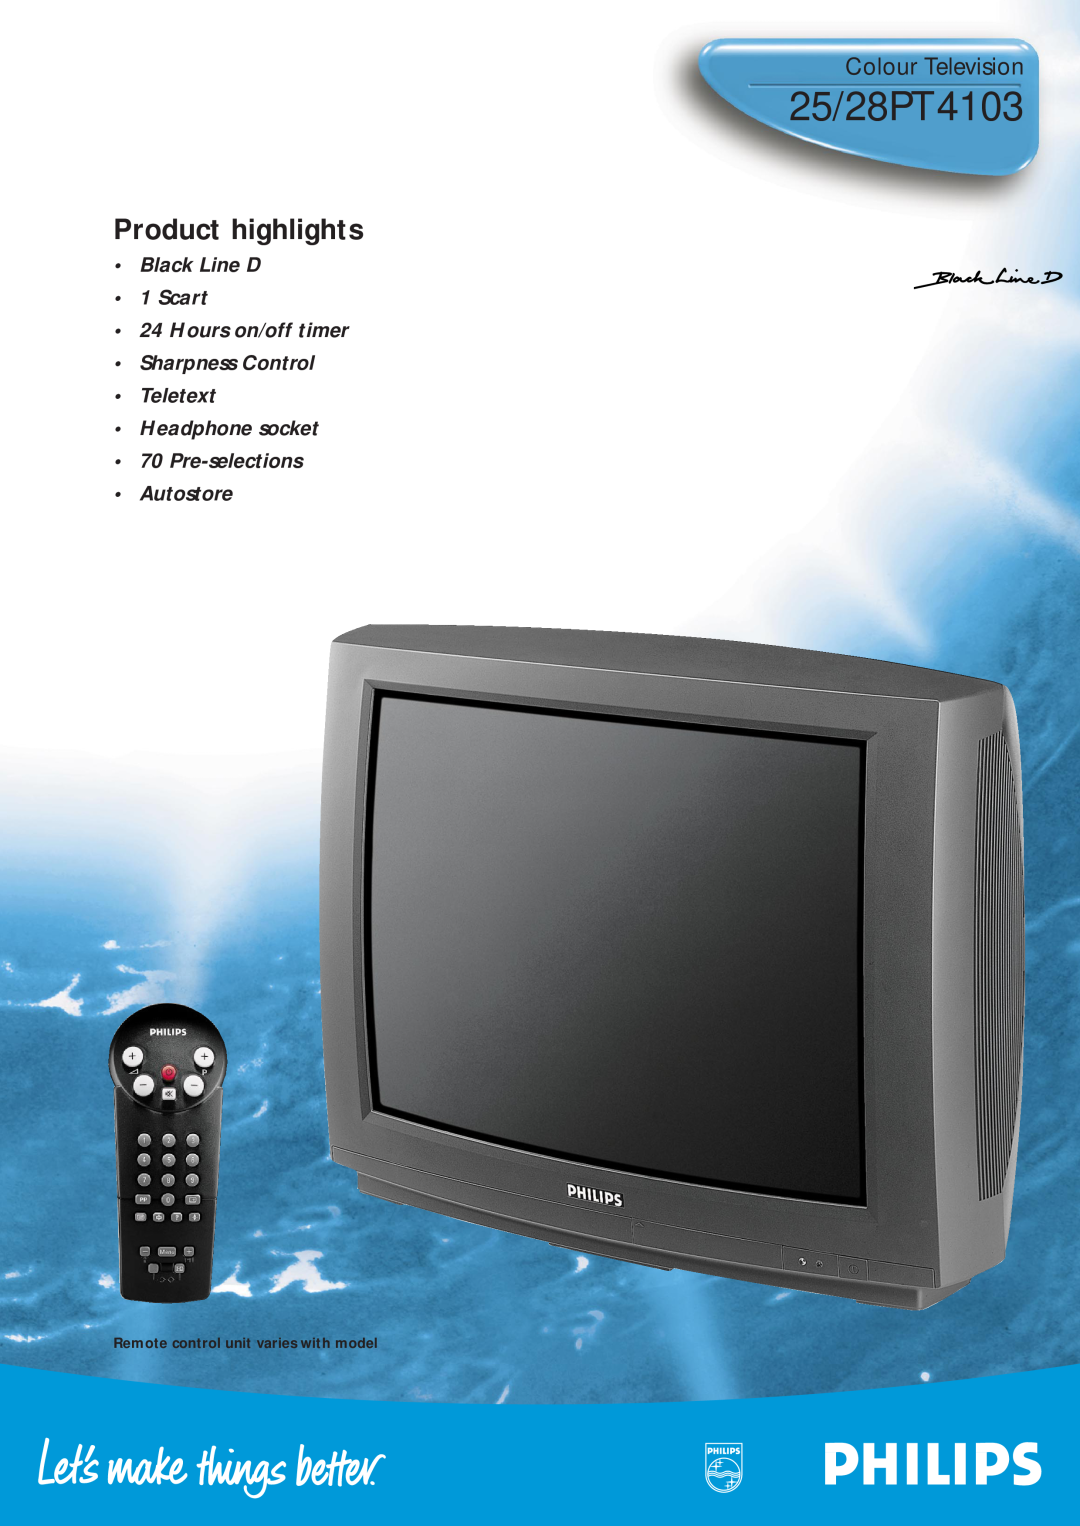 Philips 25PT4103 manual 25/28PT4103, Colour Television, Product highlights, Headphone socket 70 Pre-selections Autostore 